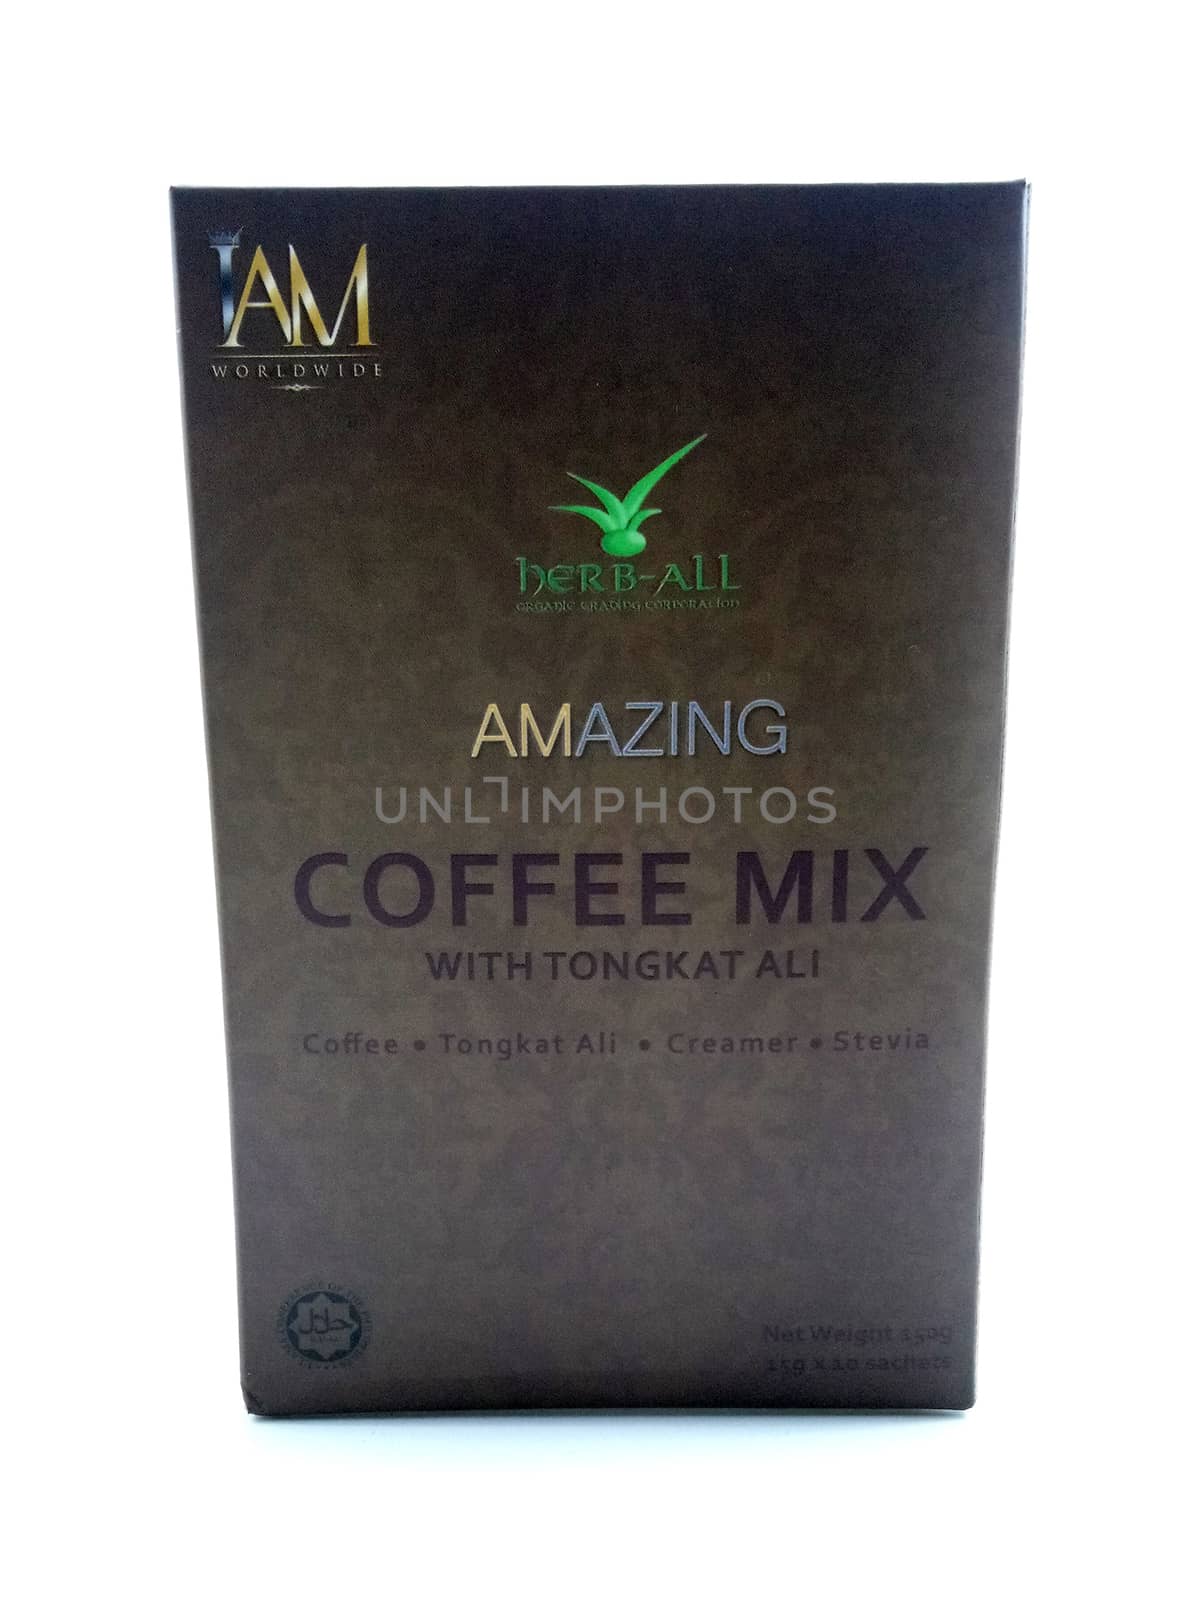 Iam amazing coffee mix with tongkat ali in Manila, Philippines by imwaltersy